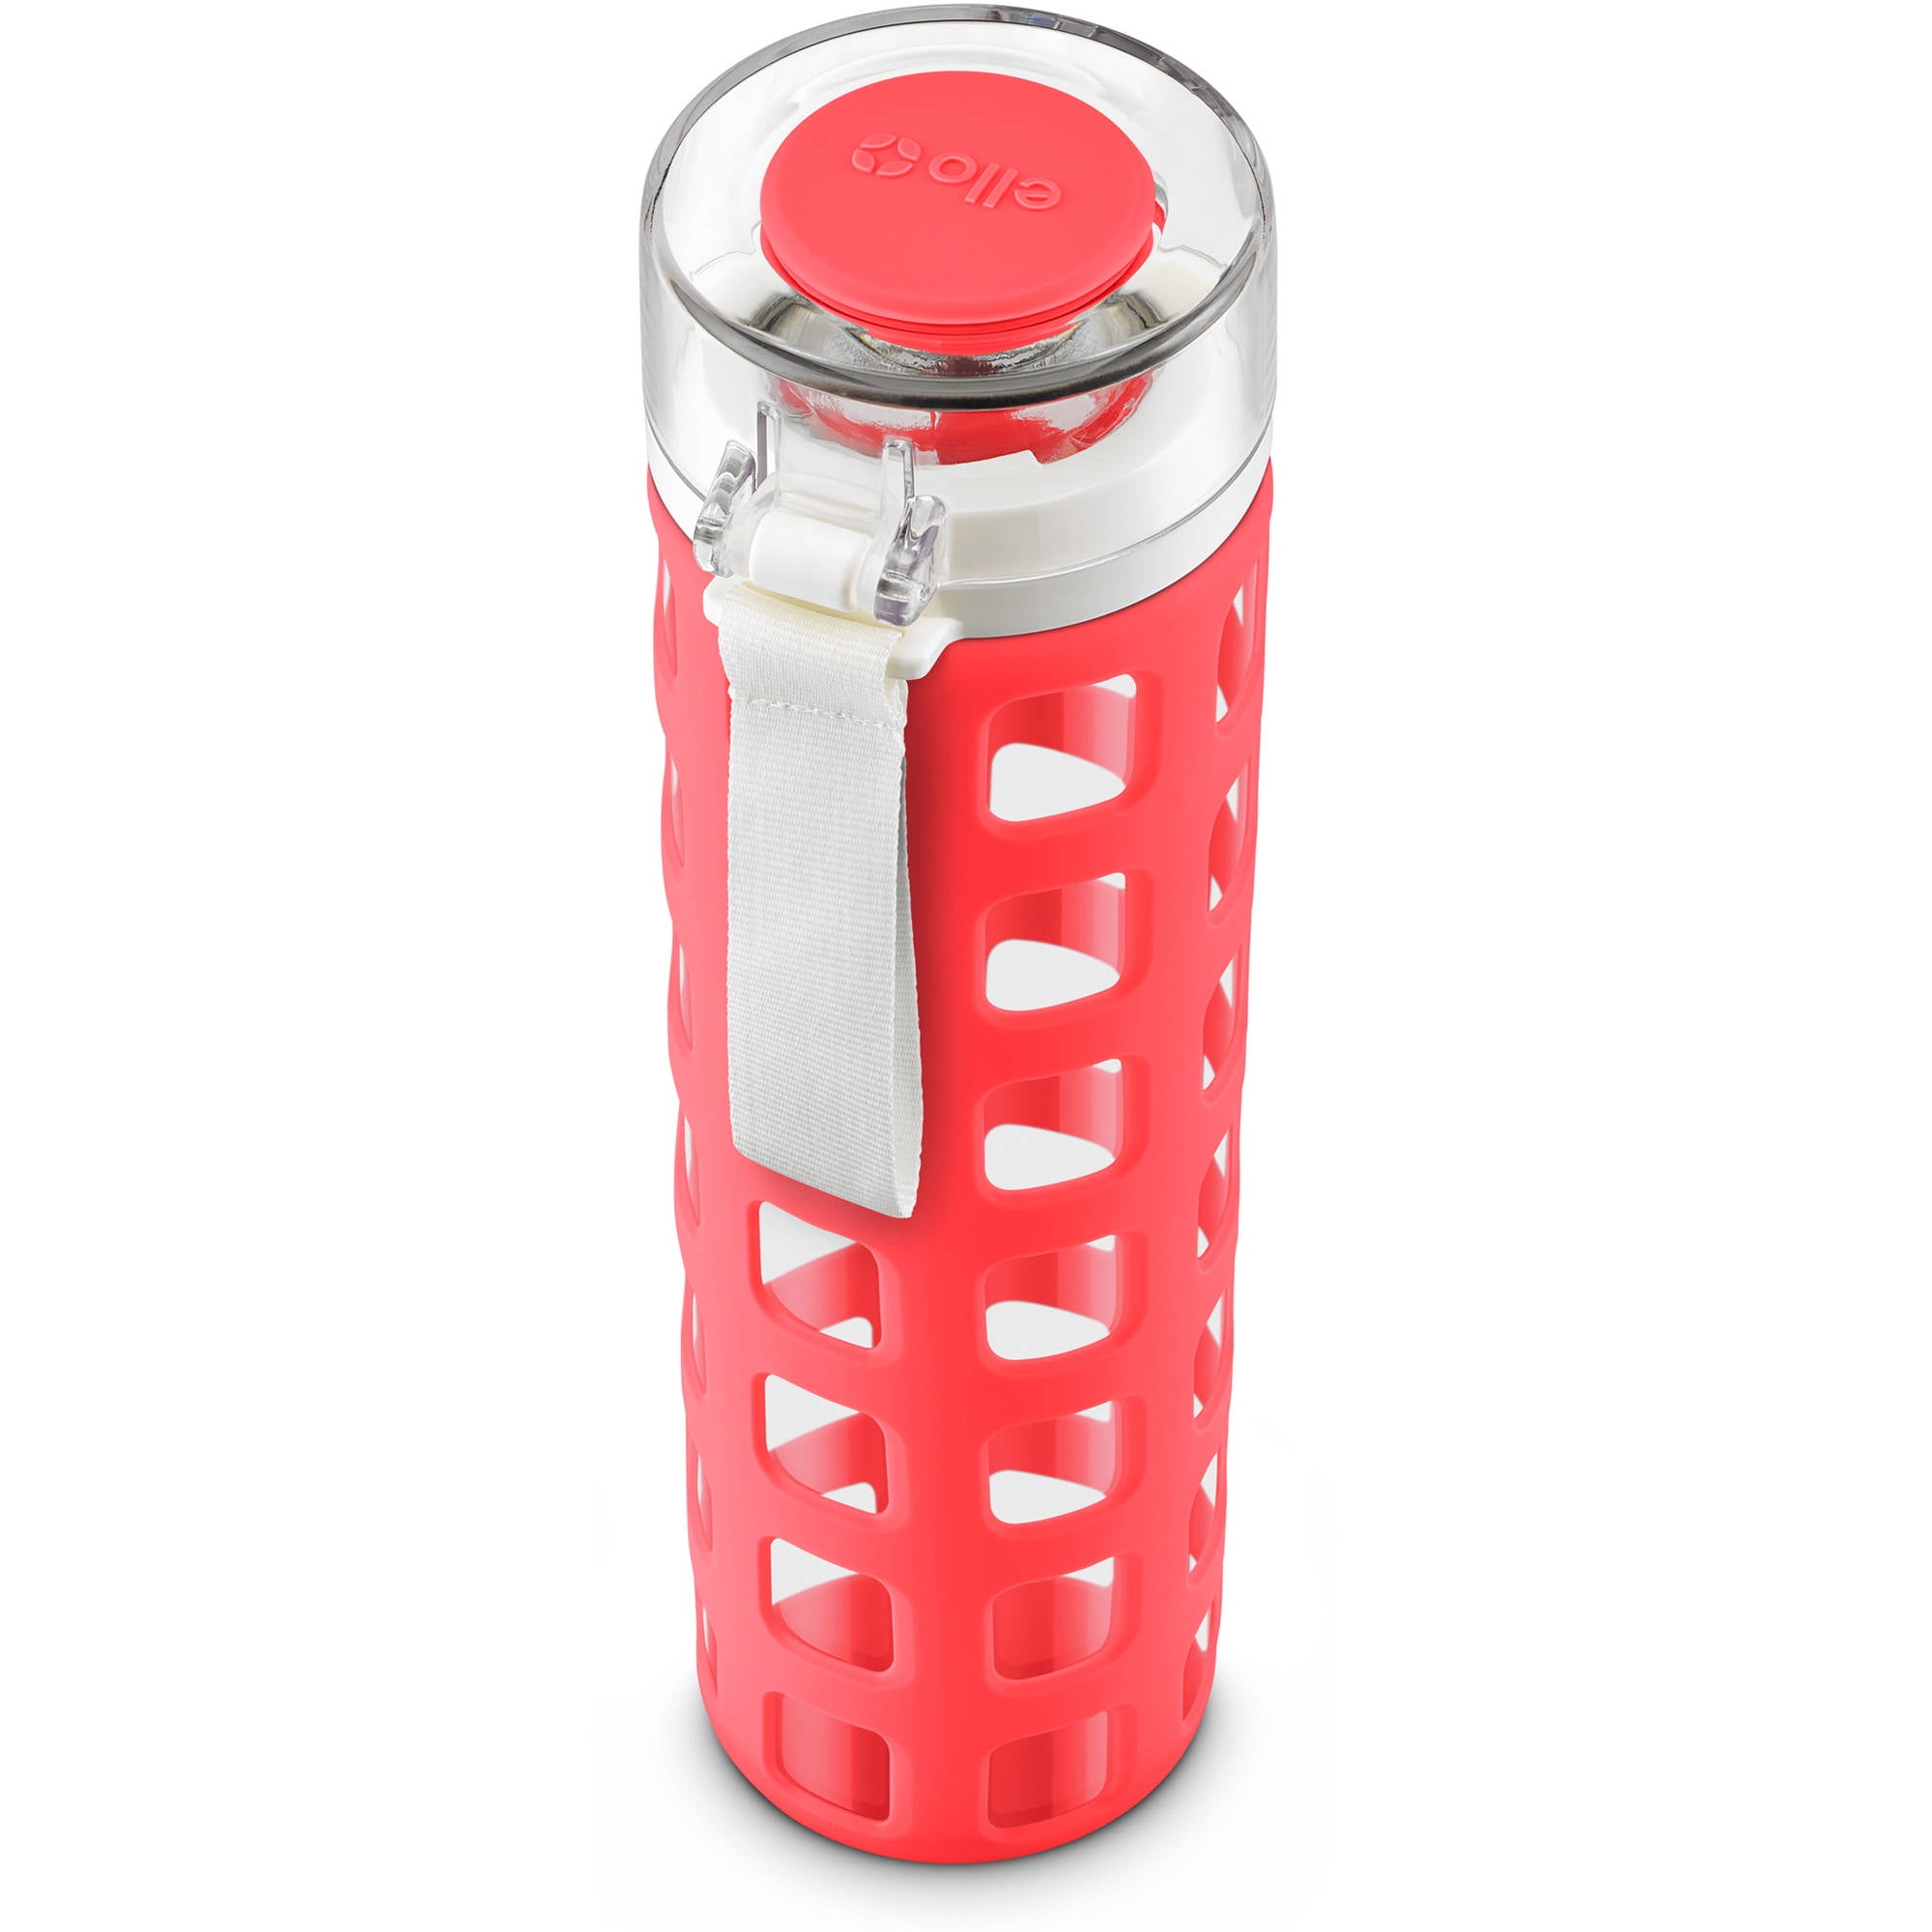 Ello Syndicate Glass Water Bottle - Replacement Lid